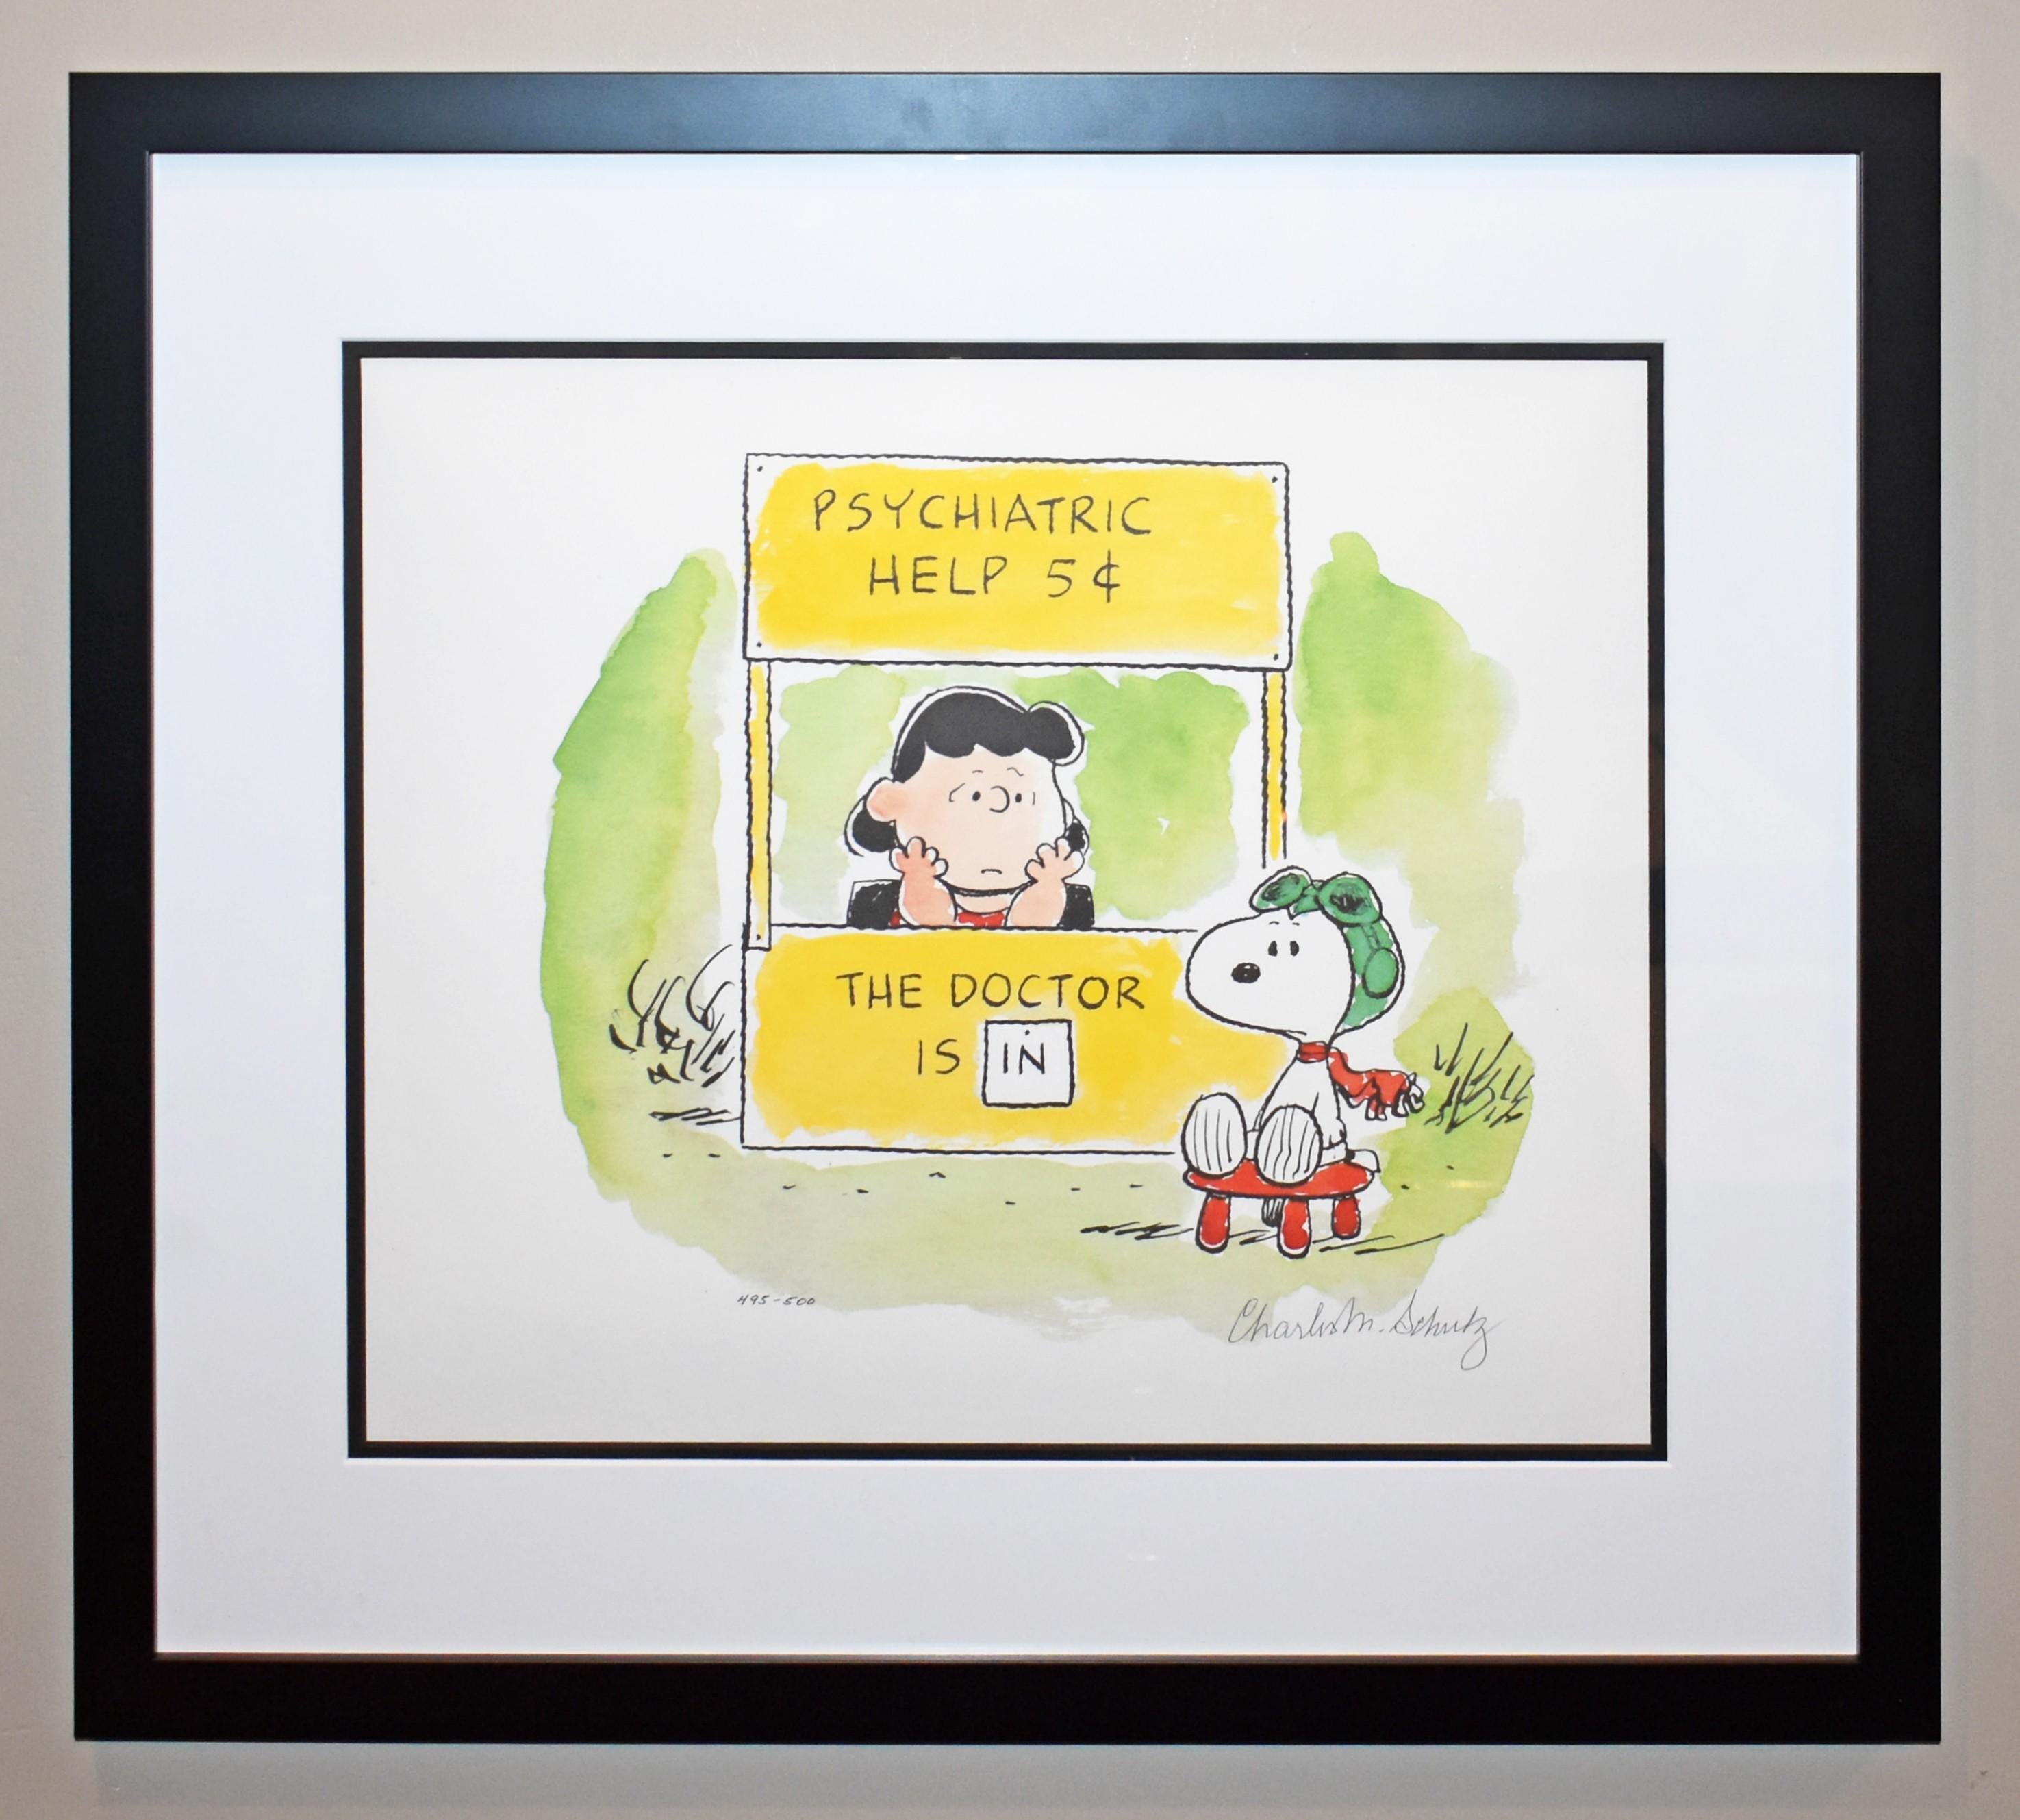 Five Cents, Please - Print by Charles M. Schulz